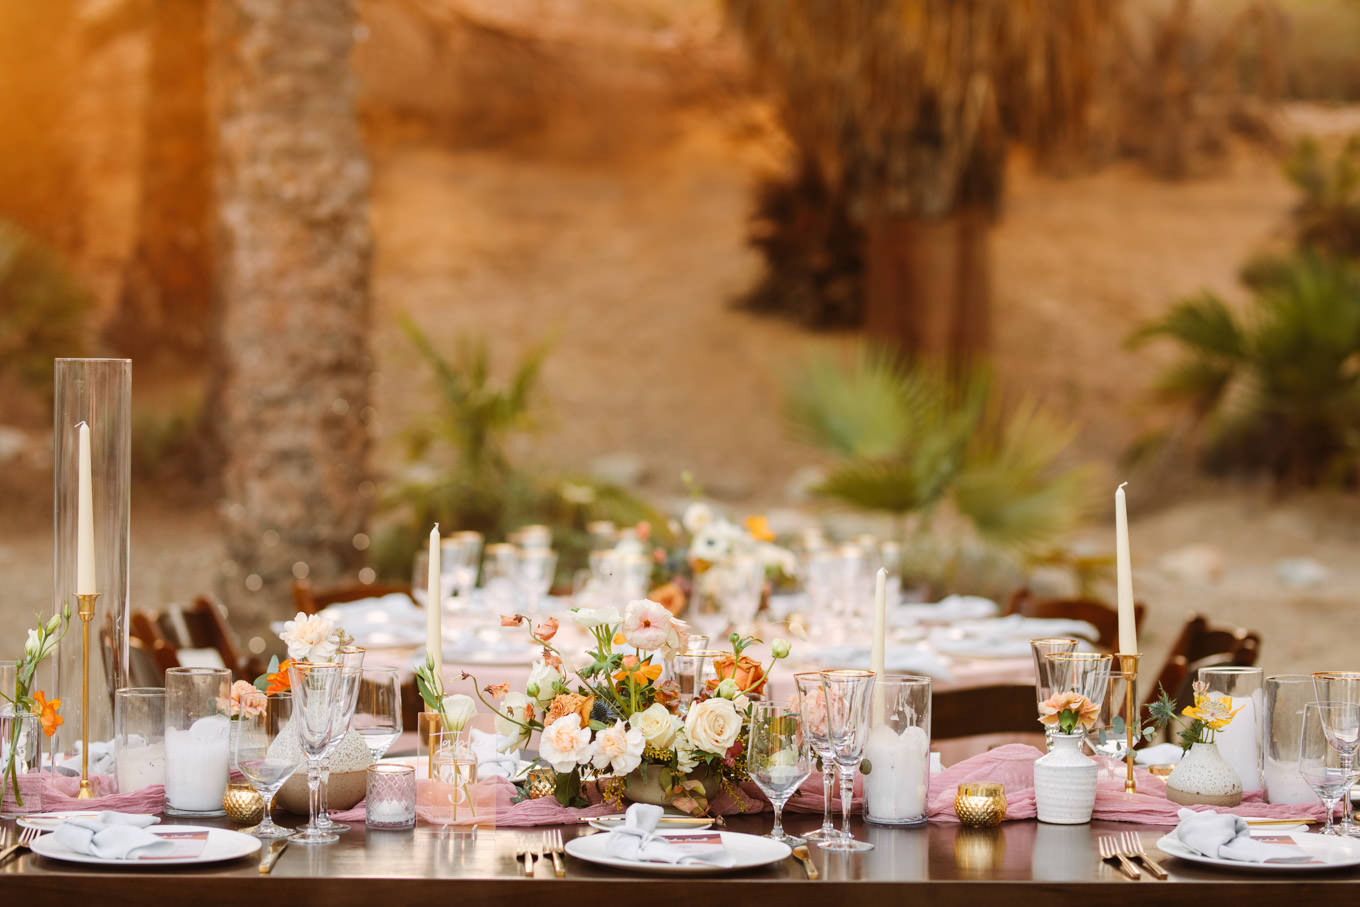 Wedding tablescape at reception | Living Desert Zoo & Gardens wedding with unique details | Elevated and colorful wedding photography for fun-loving couples in Southern California |  #PalmSprings #palmspringsphotographer #gardenwedding #palmspringswedding  Source: Mary Costa Photography | Los Angeles wedding photographer 